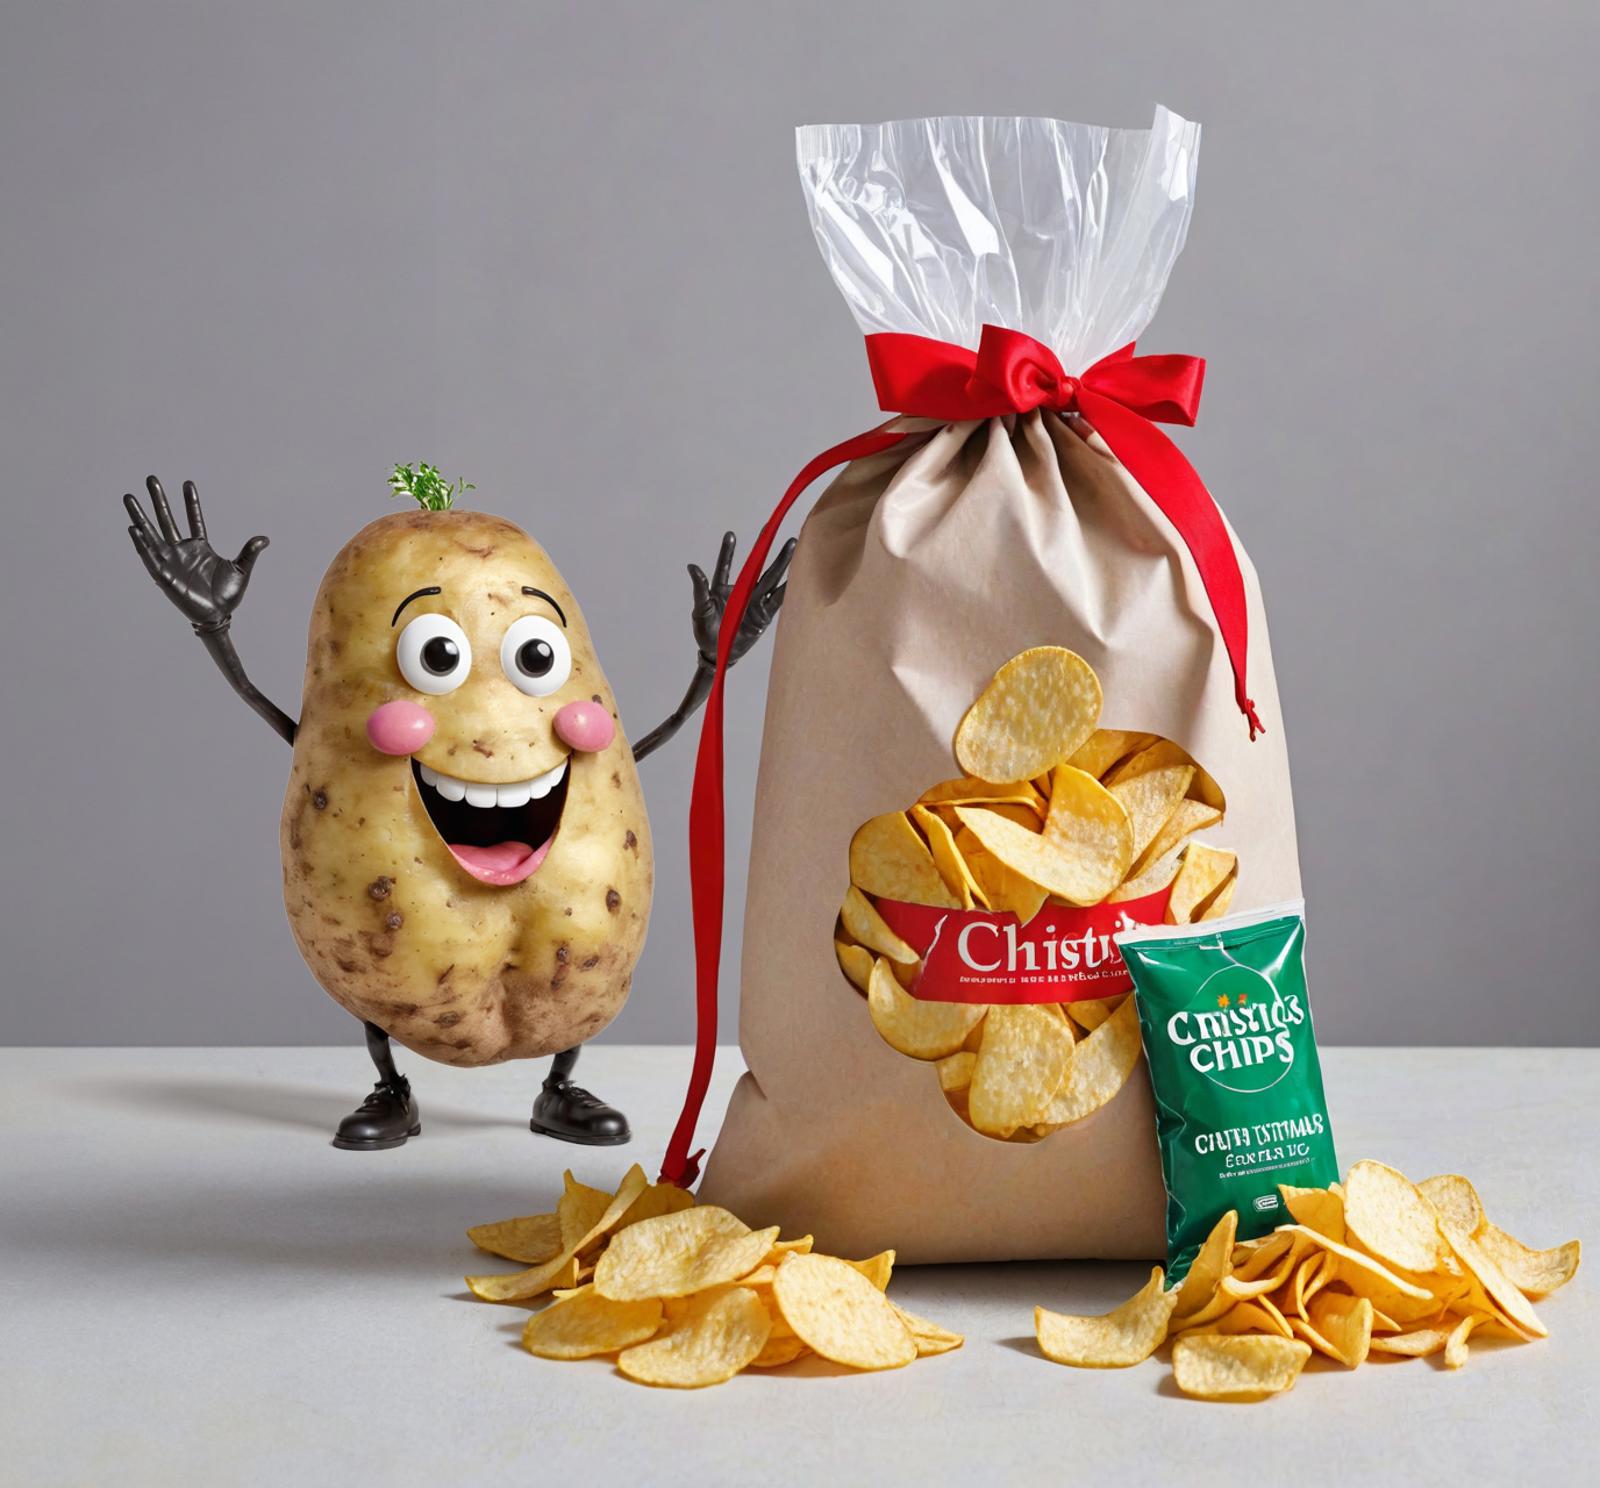 A bag of Chirstie's chips with a potato mascot.